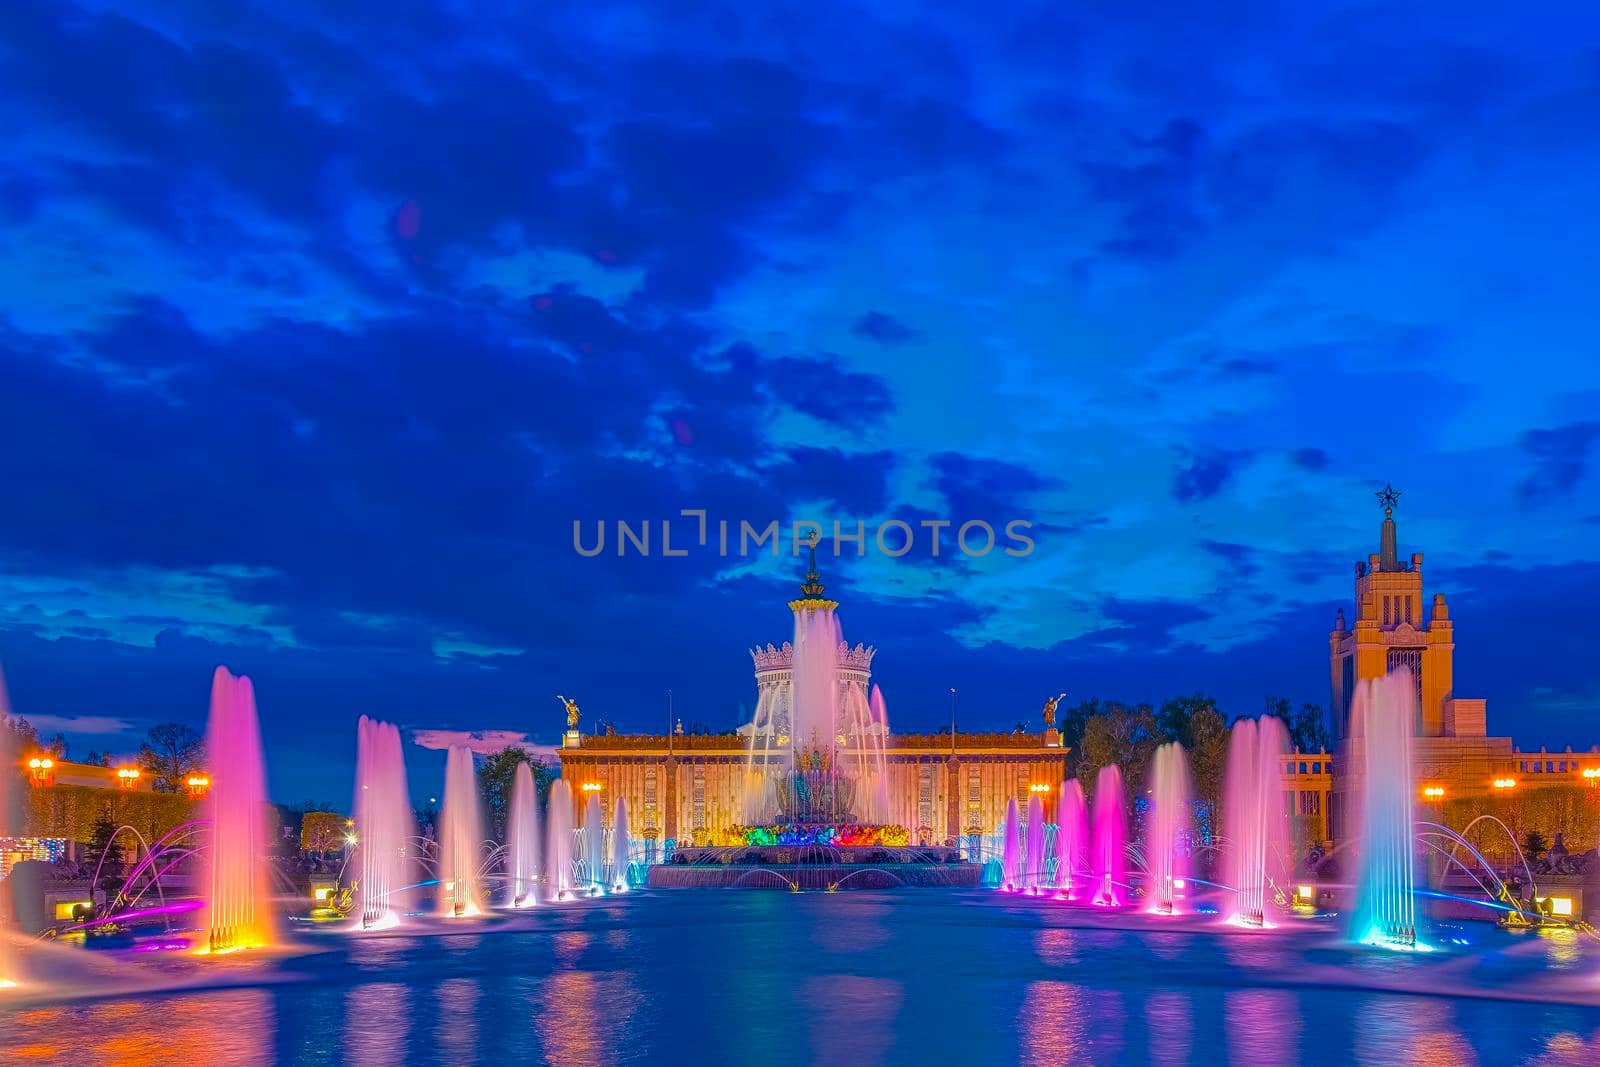 Cascade of fountains with illumination in the regime time, at VDNH in Moscow in the evening. Strong jets beat high with different colors.